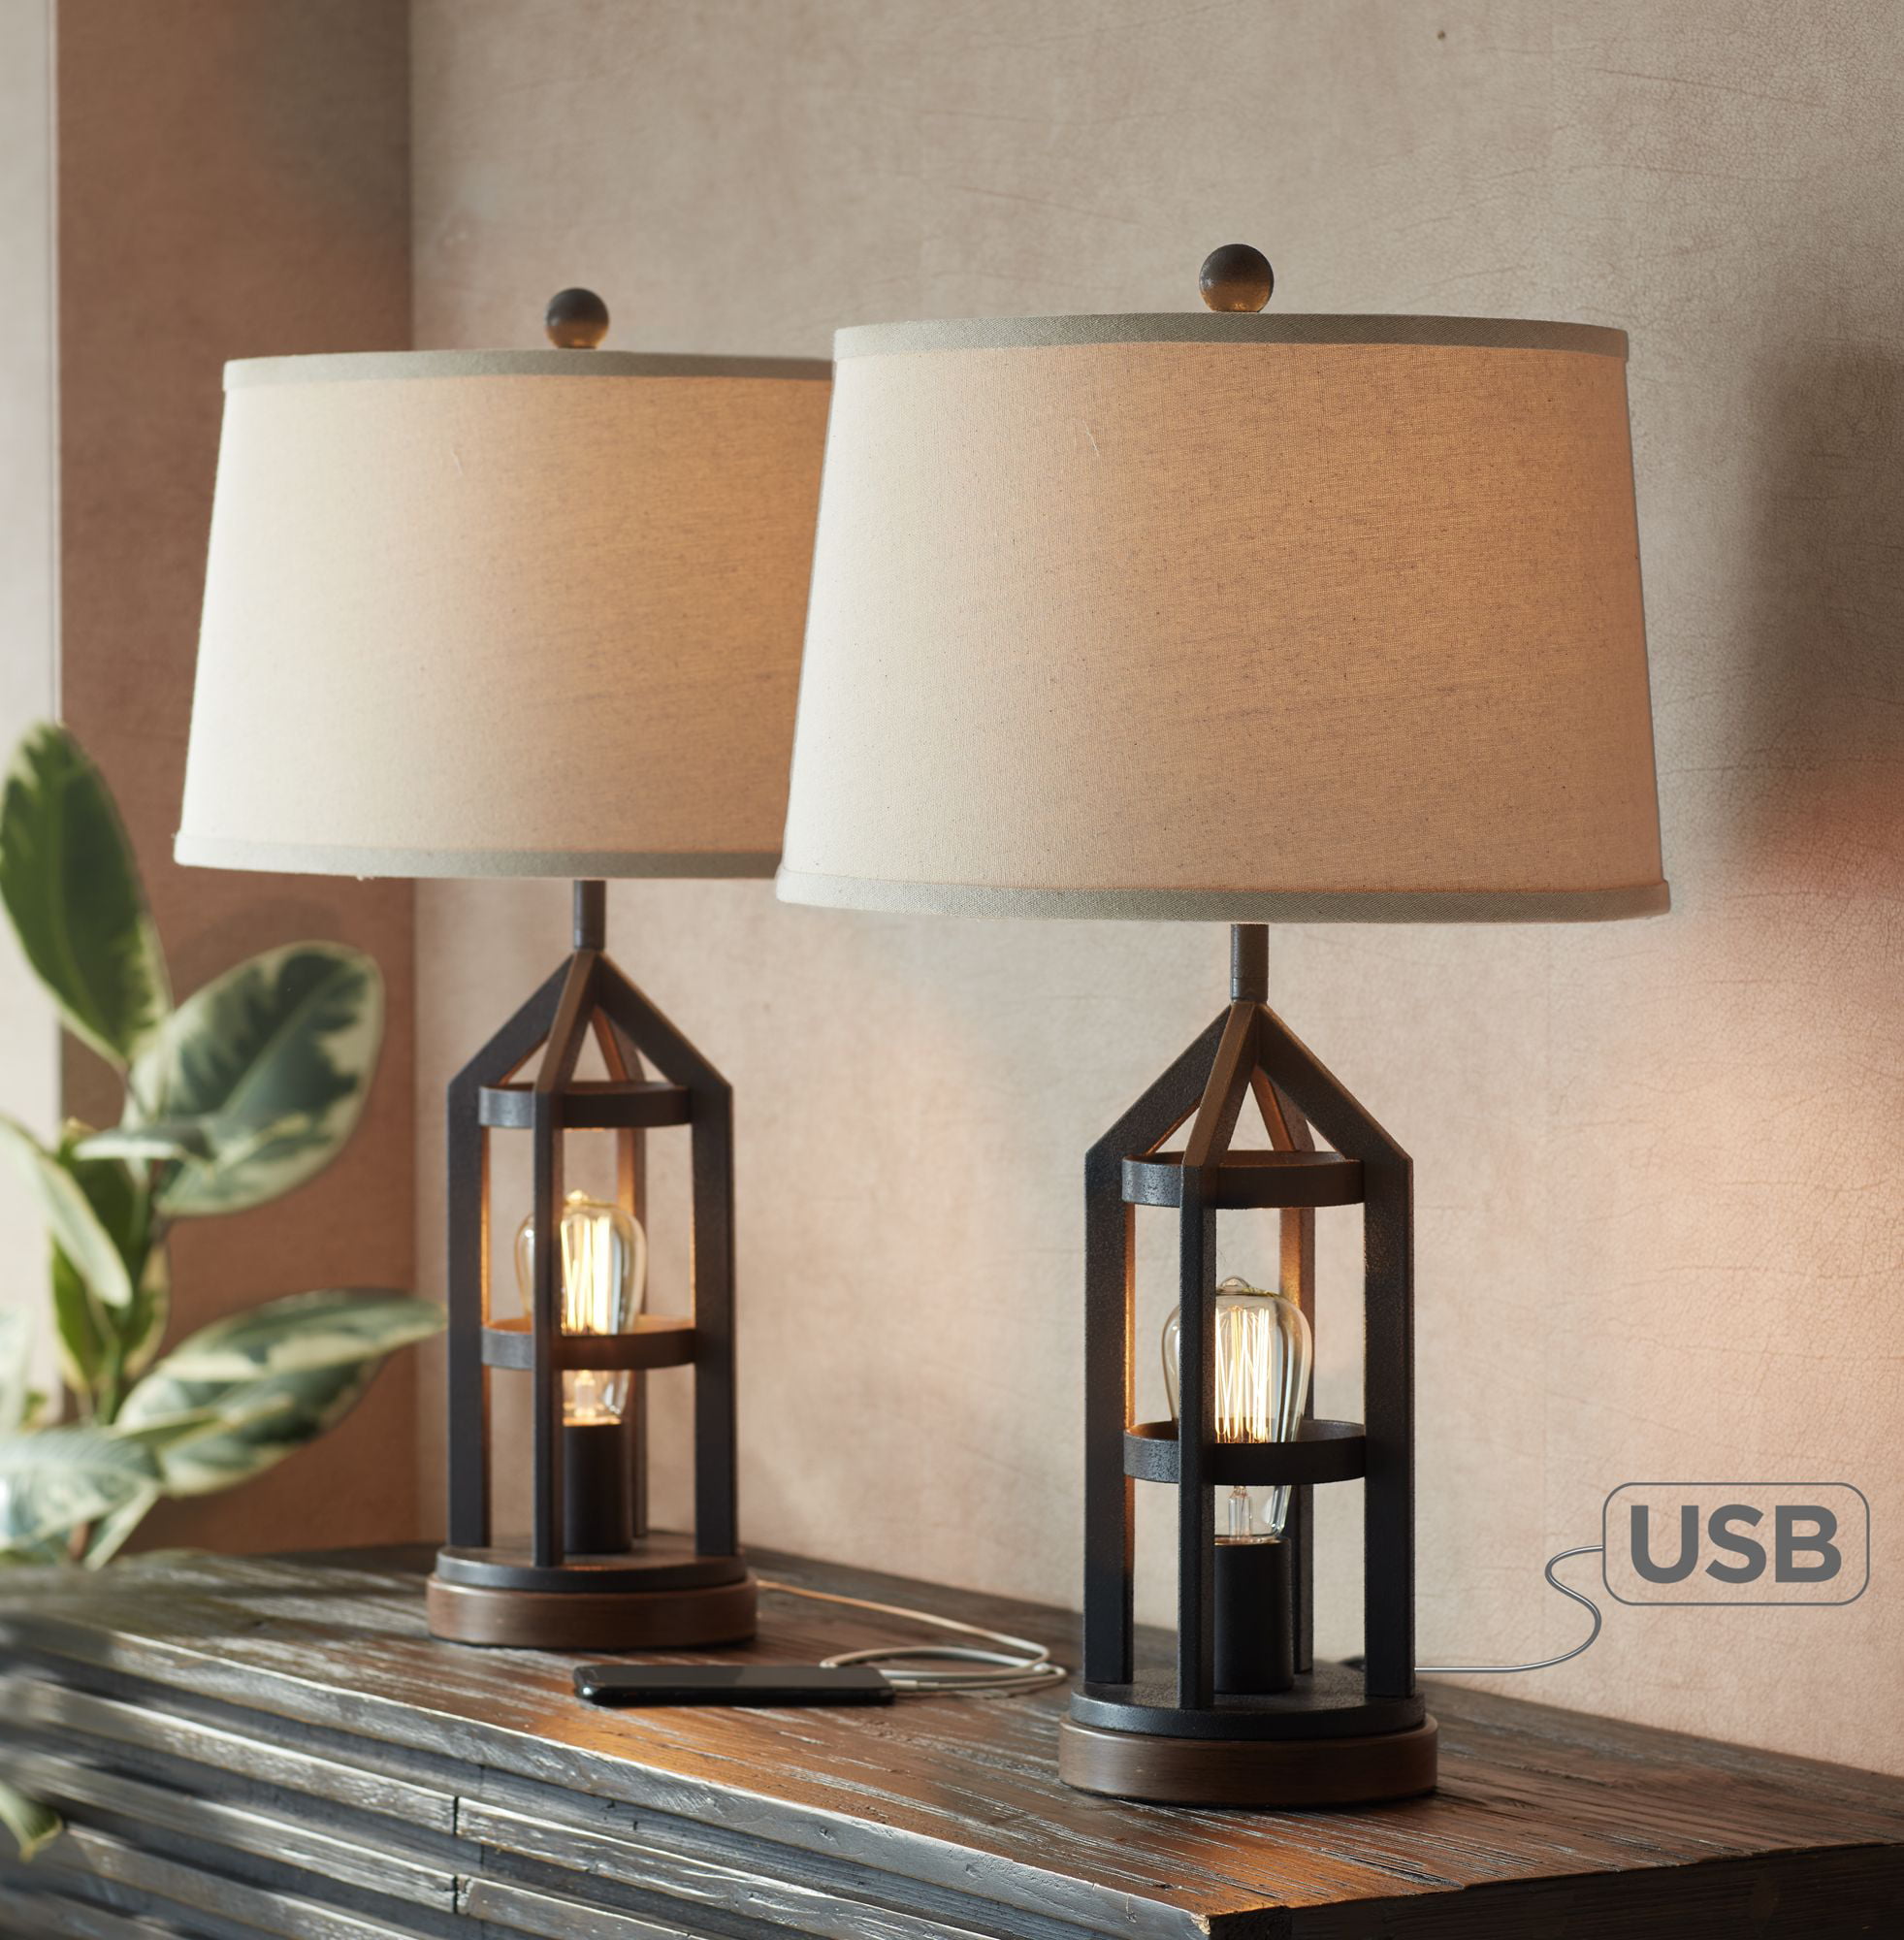 Franklin Iron Works Western Table Lamps, Franklin Iron Works Industrial Table Lamp With Usb Port